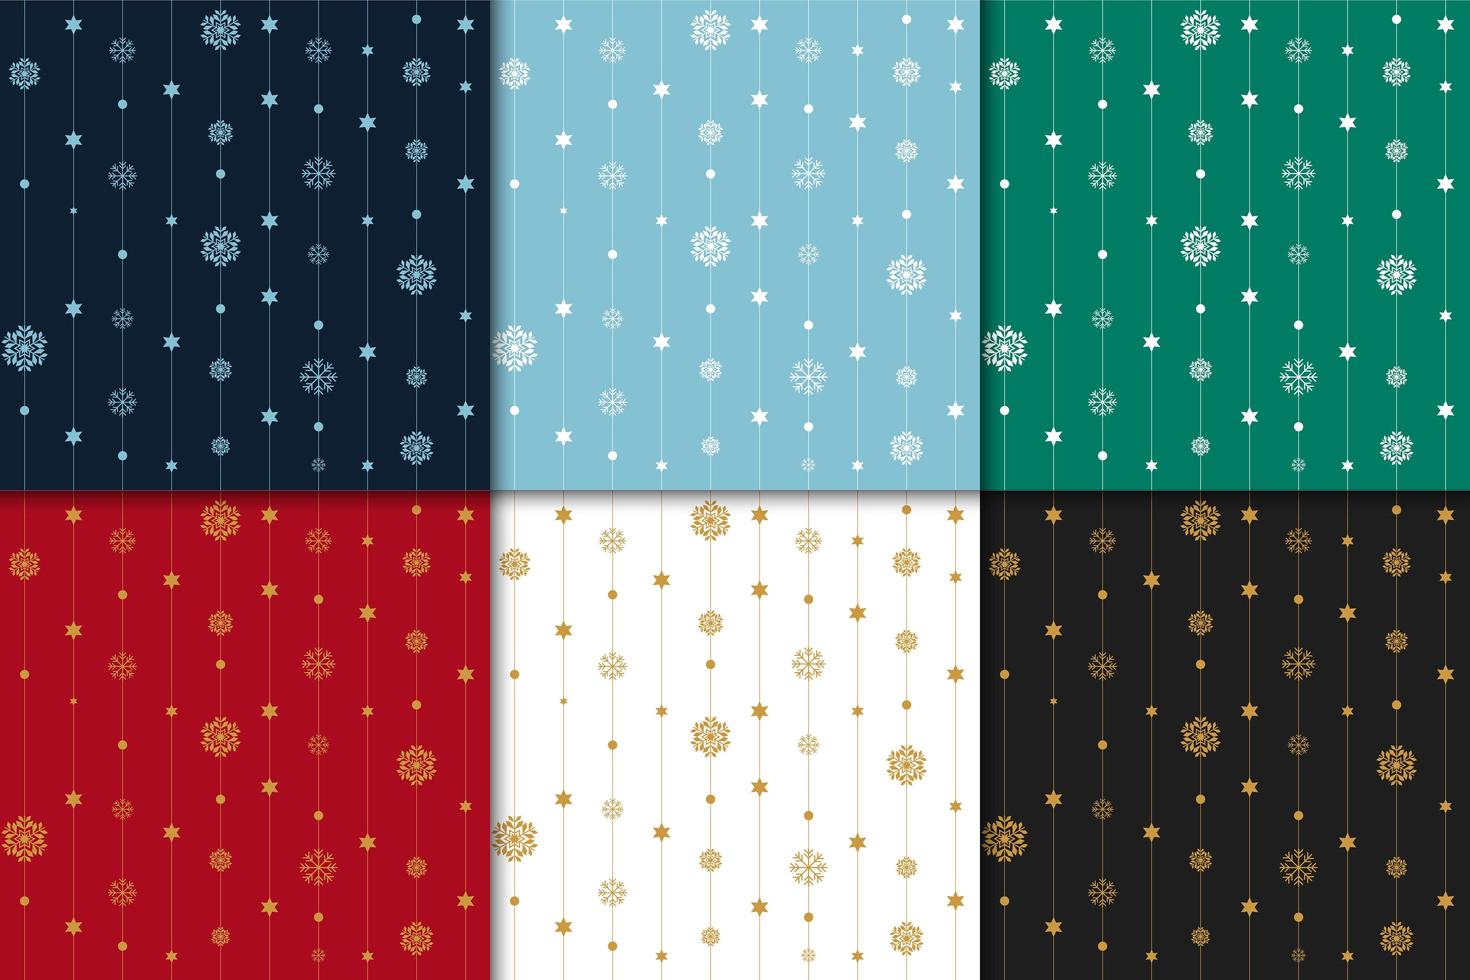 Winter holiday patterns with snowflakes vector